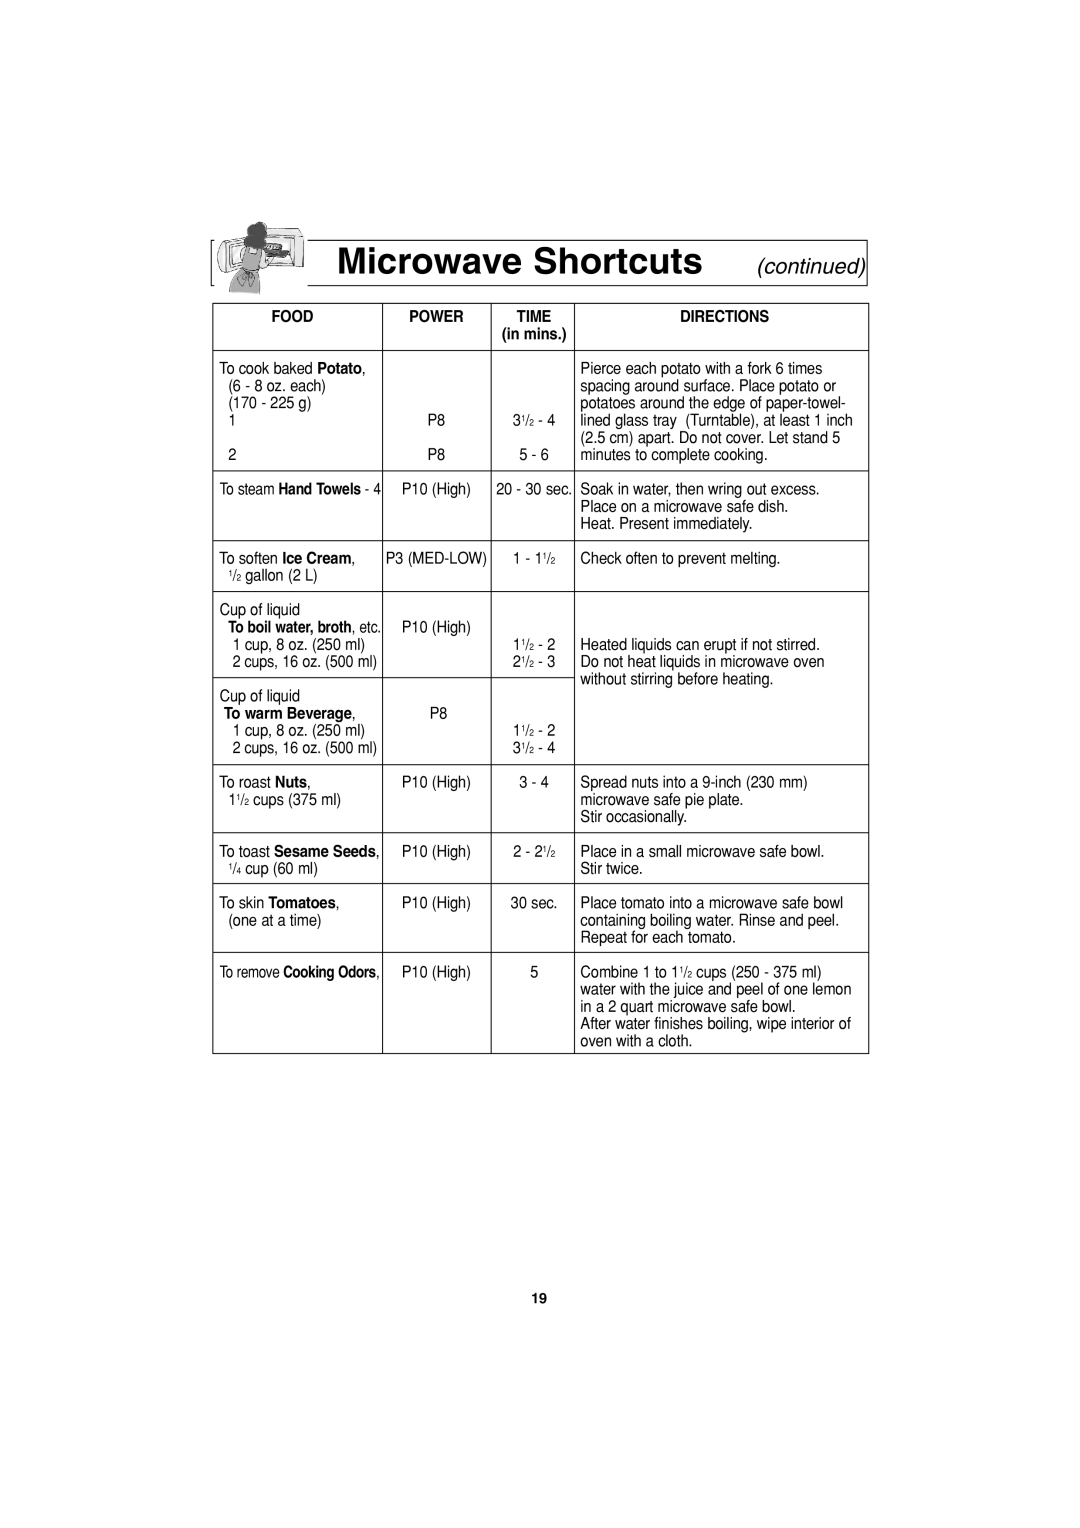 Panasonic NN-S423 important safety instructions Microwave Shortcuts, continued, Food, Directions, To warm Beverage 